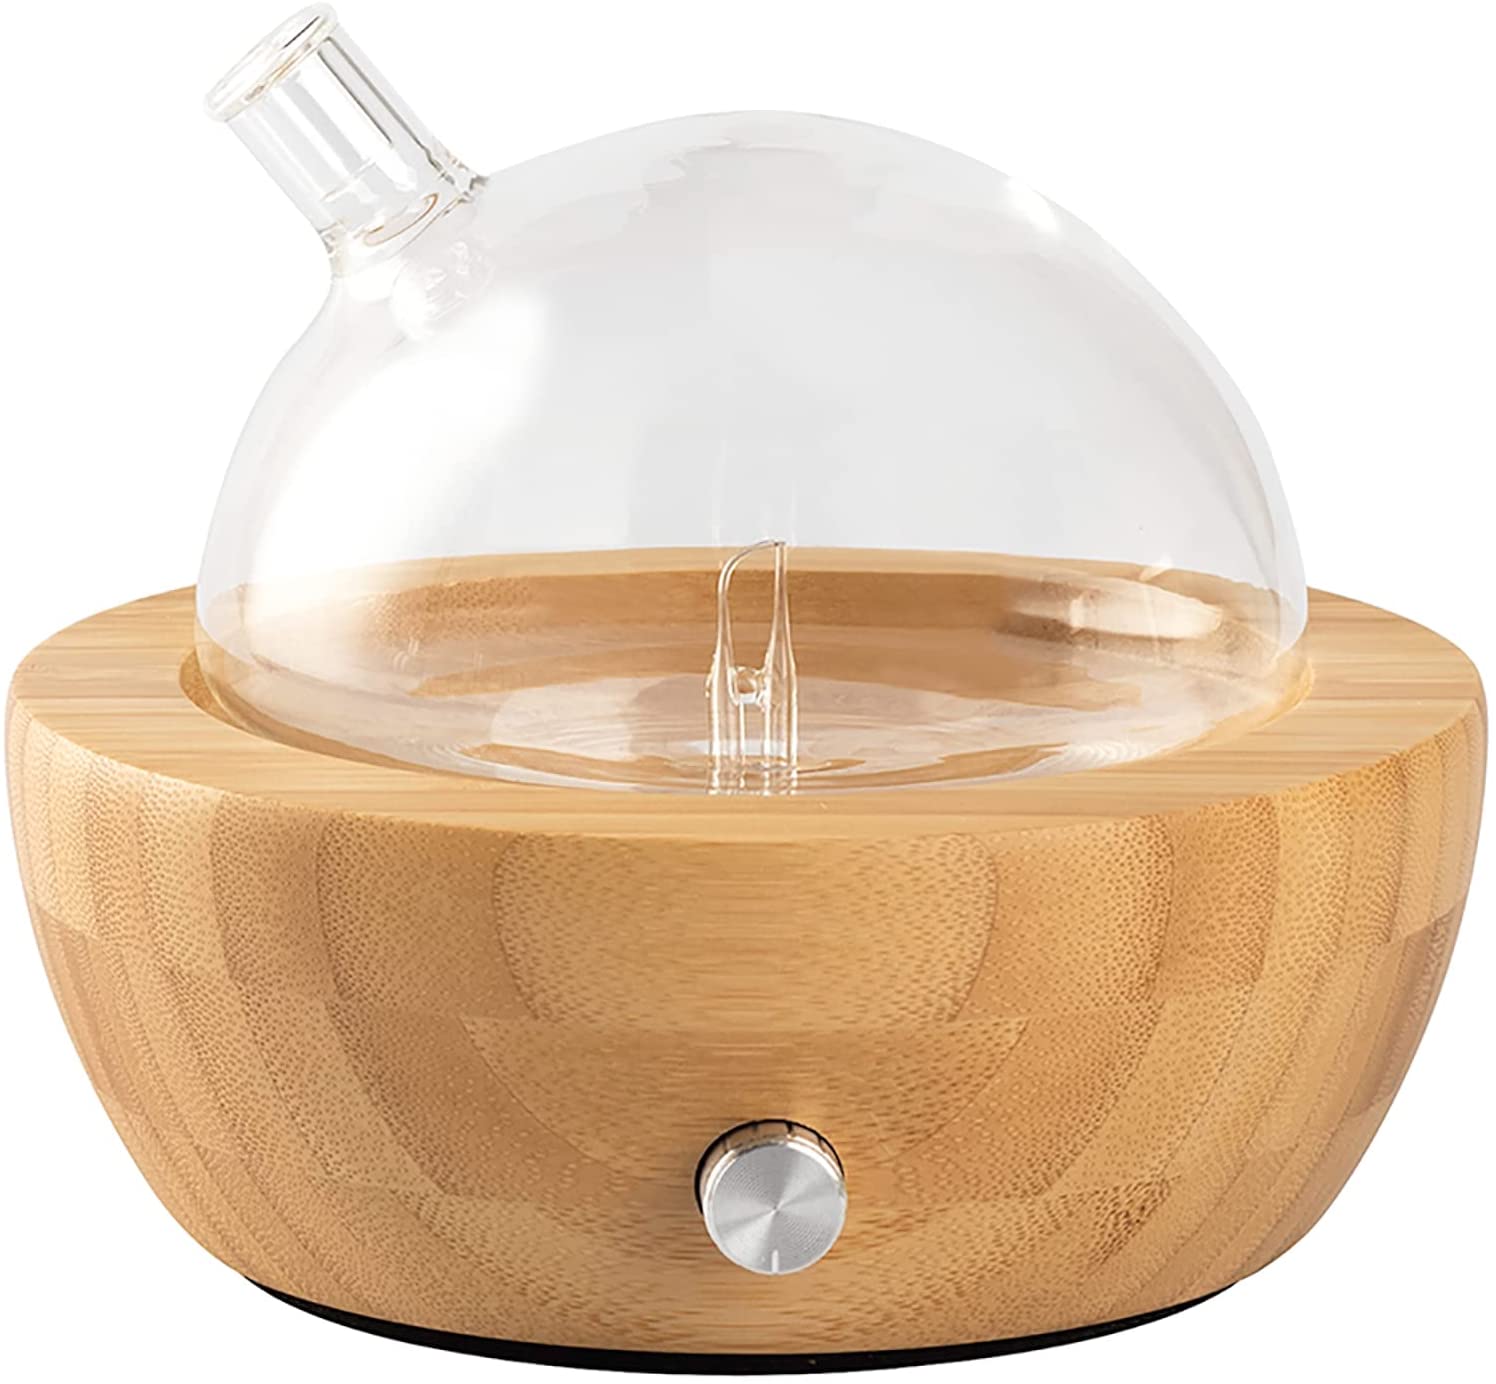 Aromatherapy Diffuser Nebulizing Diffuser Wood and Glass Essential Oil Diffuser Full Spectrum Oil Adaptability No Water,No Heat,Super Quiet for Home Yoga Office